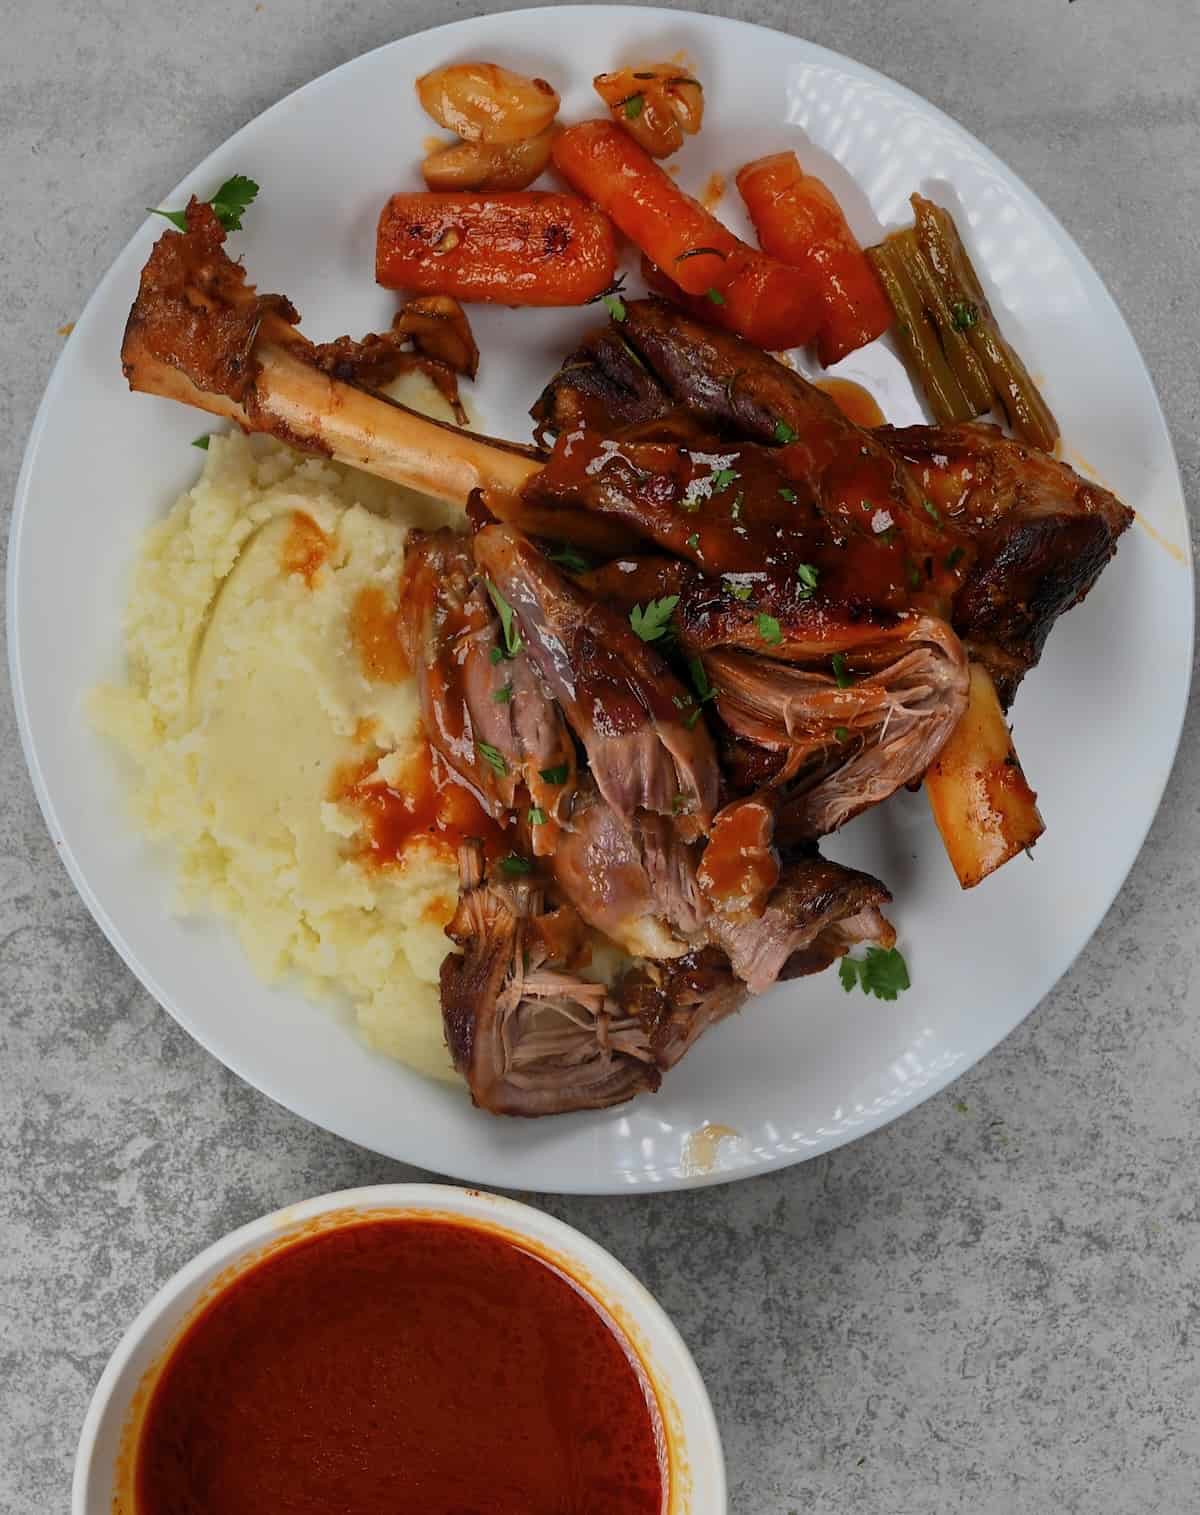 A serving of lamb shank with mashed potatoes